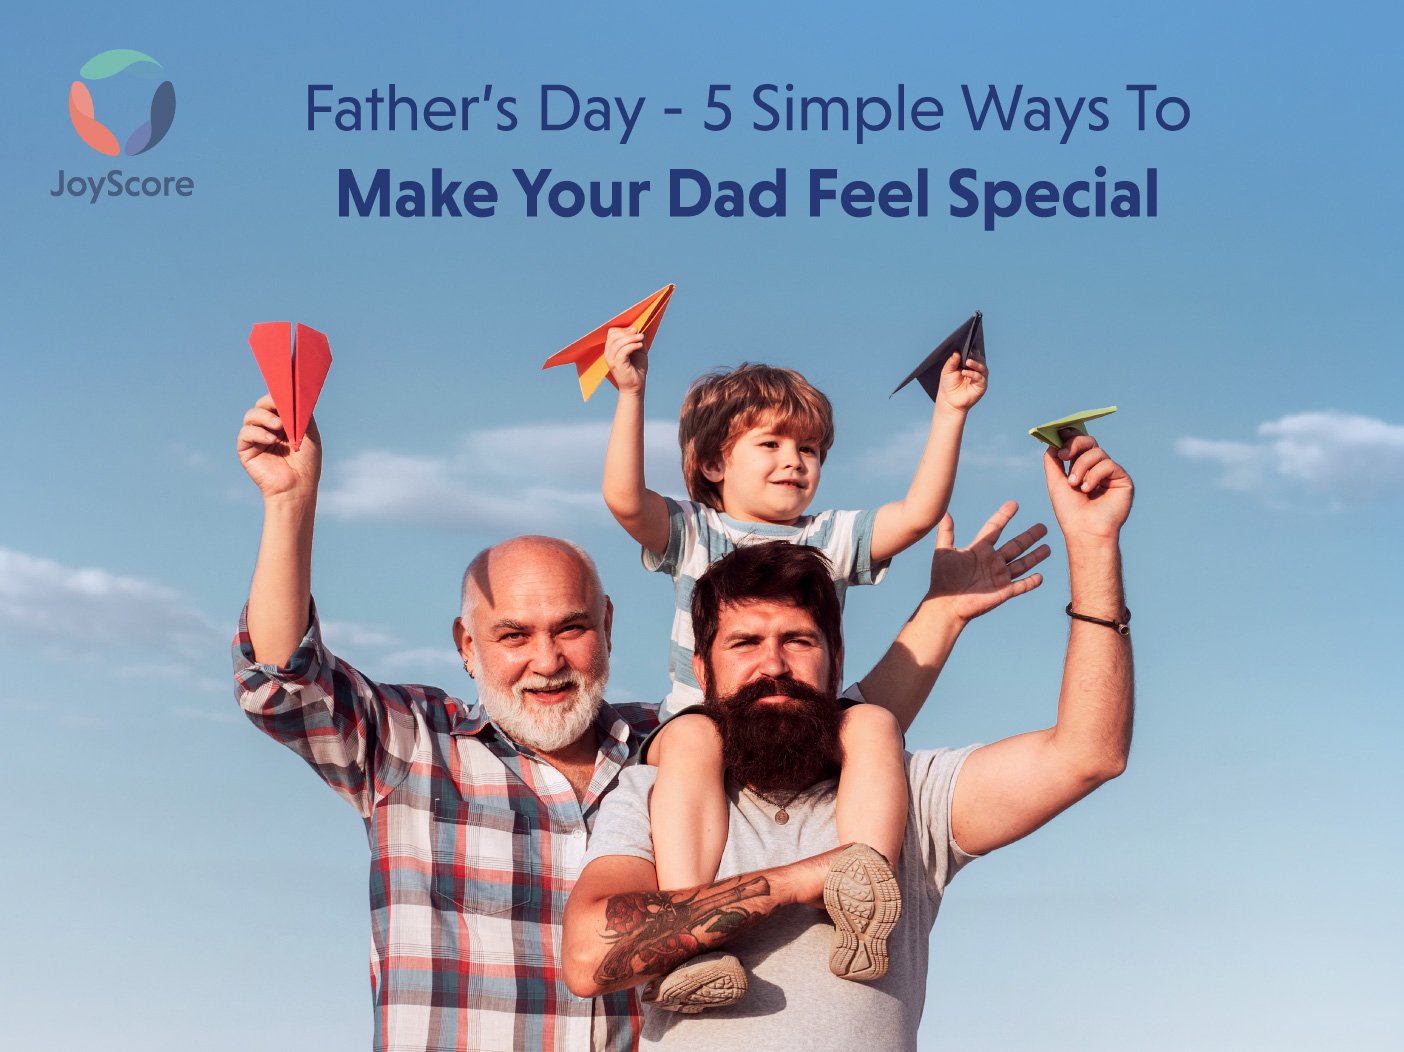 5 Ways to Make Your Dad Feel Special on Father’s Day